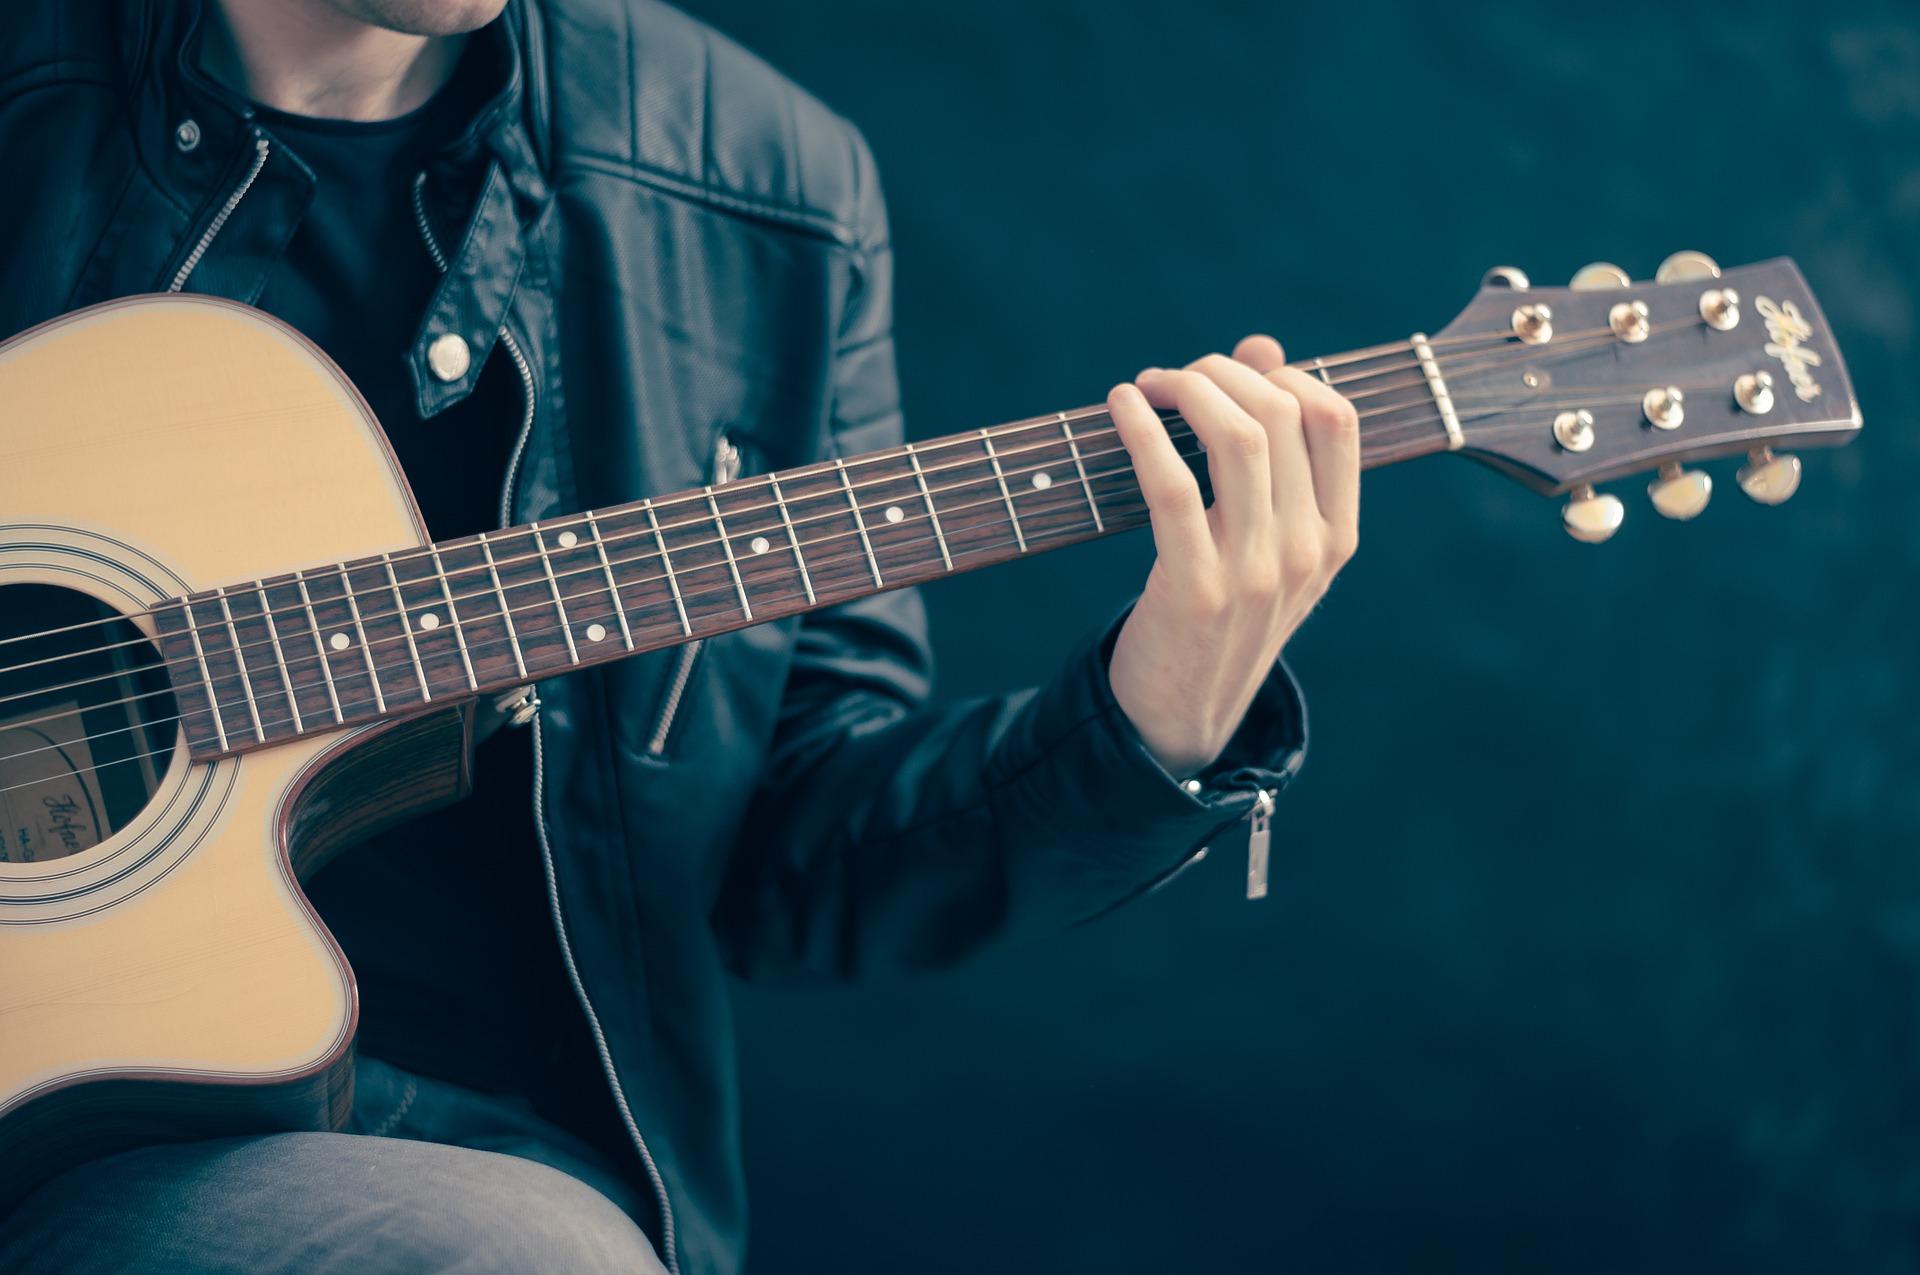 The best guitars to buy for beginners to suit your individual needs.